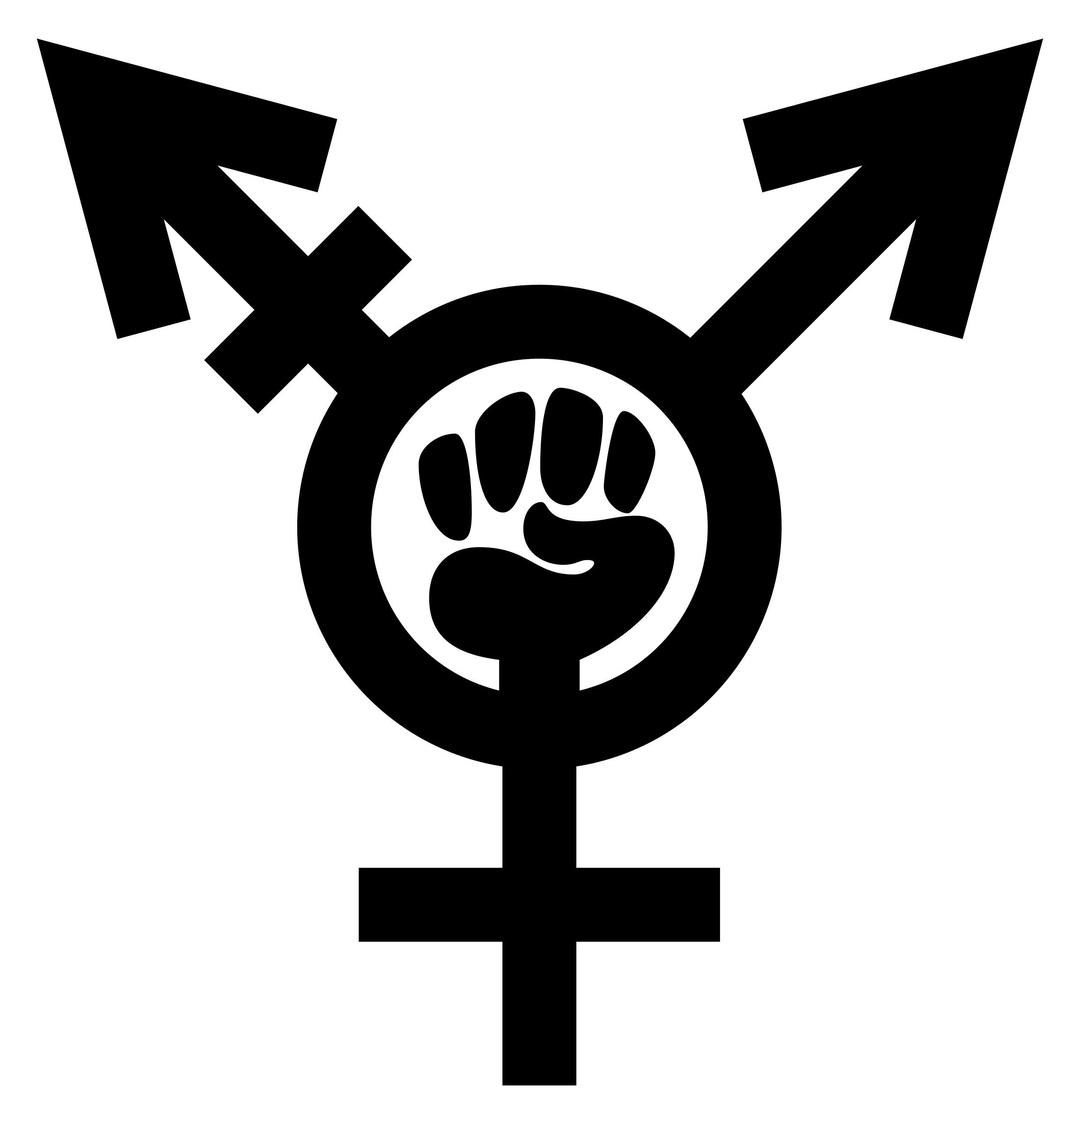 all genders - fight united png transparent